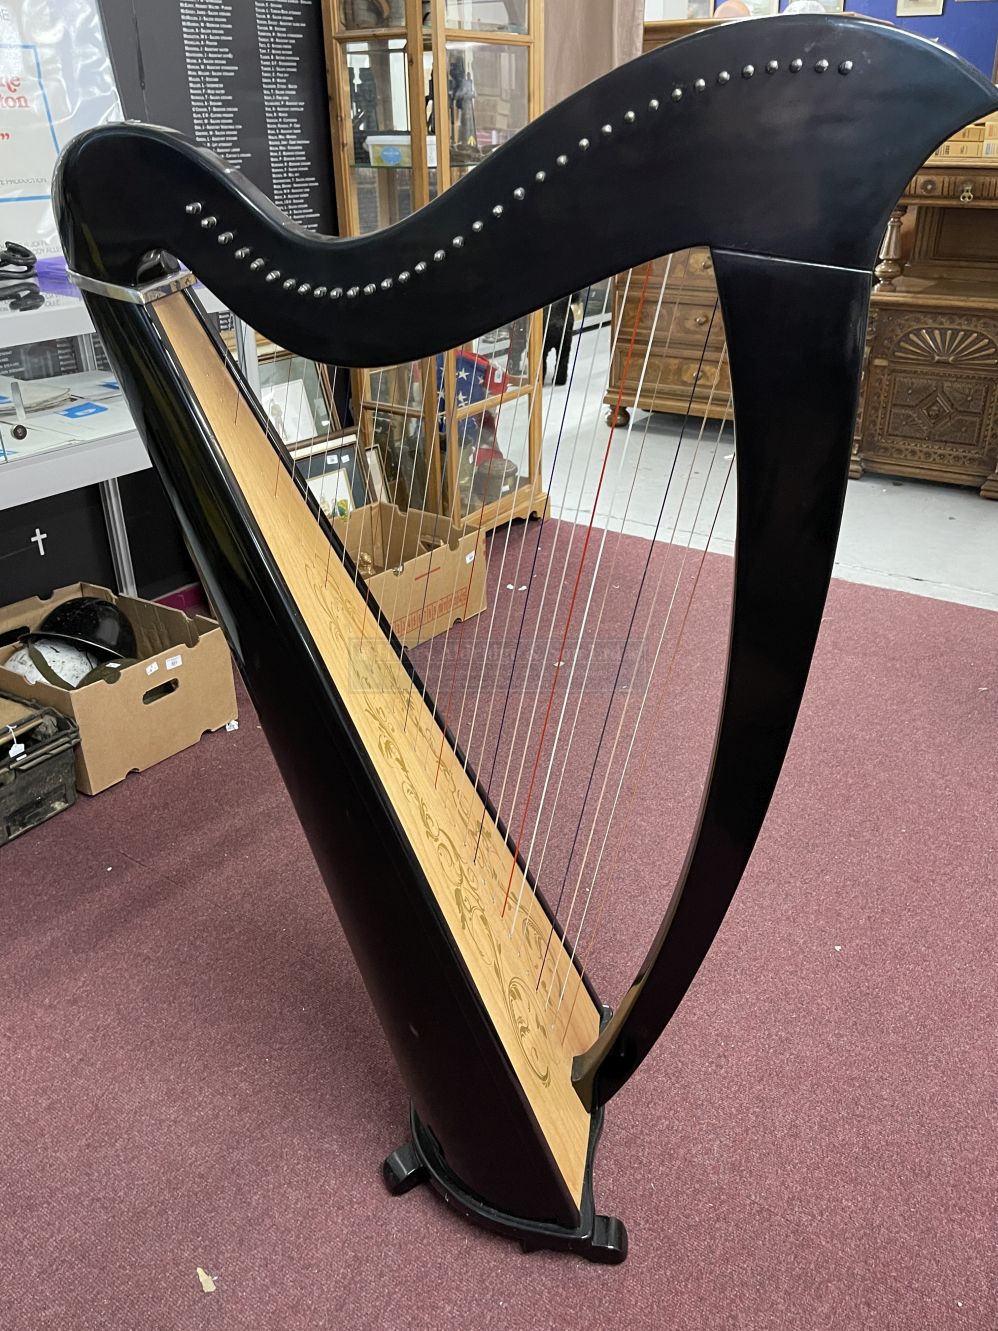 Musical Instruments: Thirty four string Celtic harp, finished in black lacquer with decorated